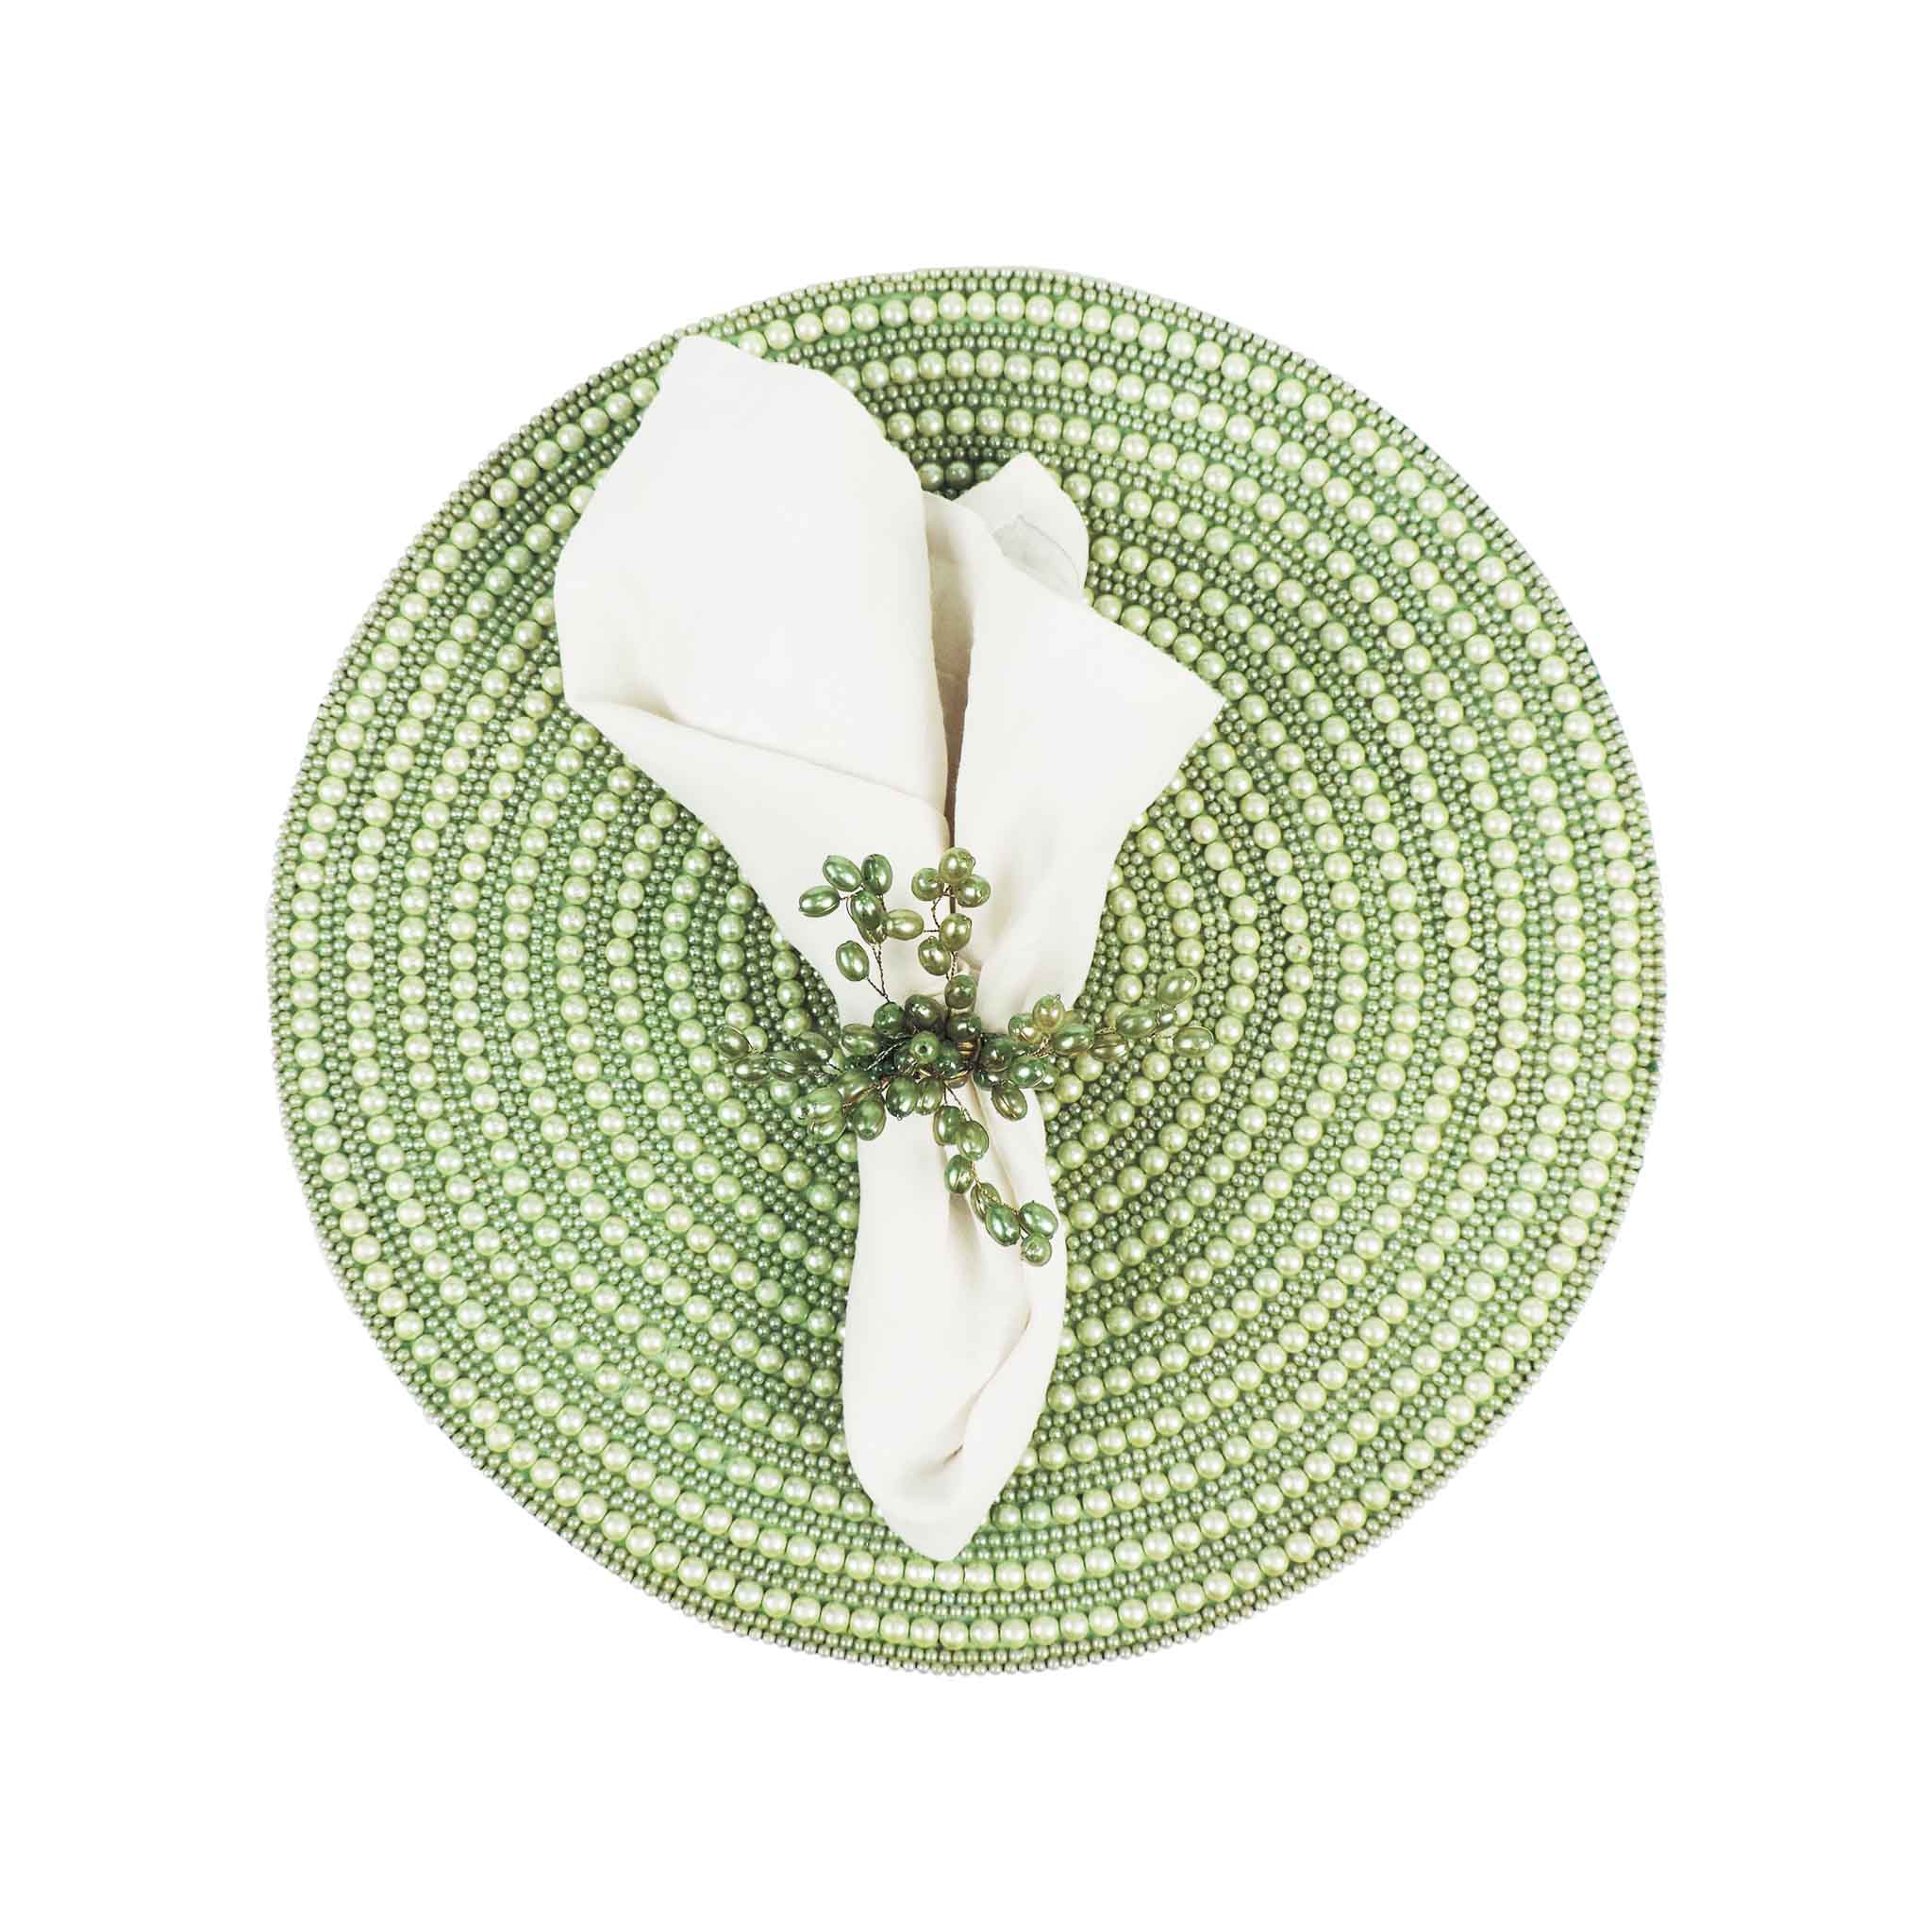 Whirl Bead Table Setting for 4 - Embroidered Placemats, Coasters & Napkin Rings in Light Green